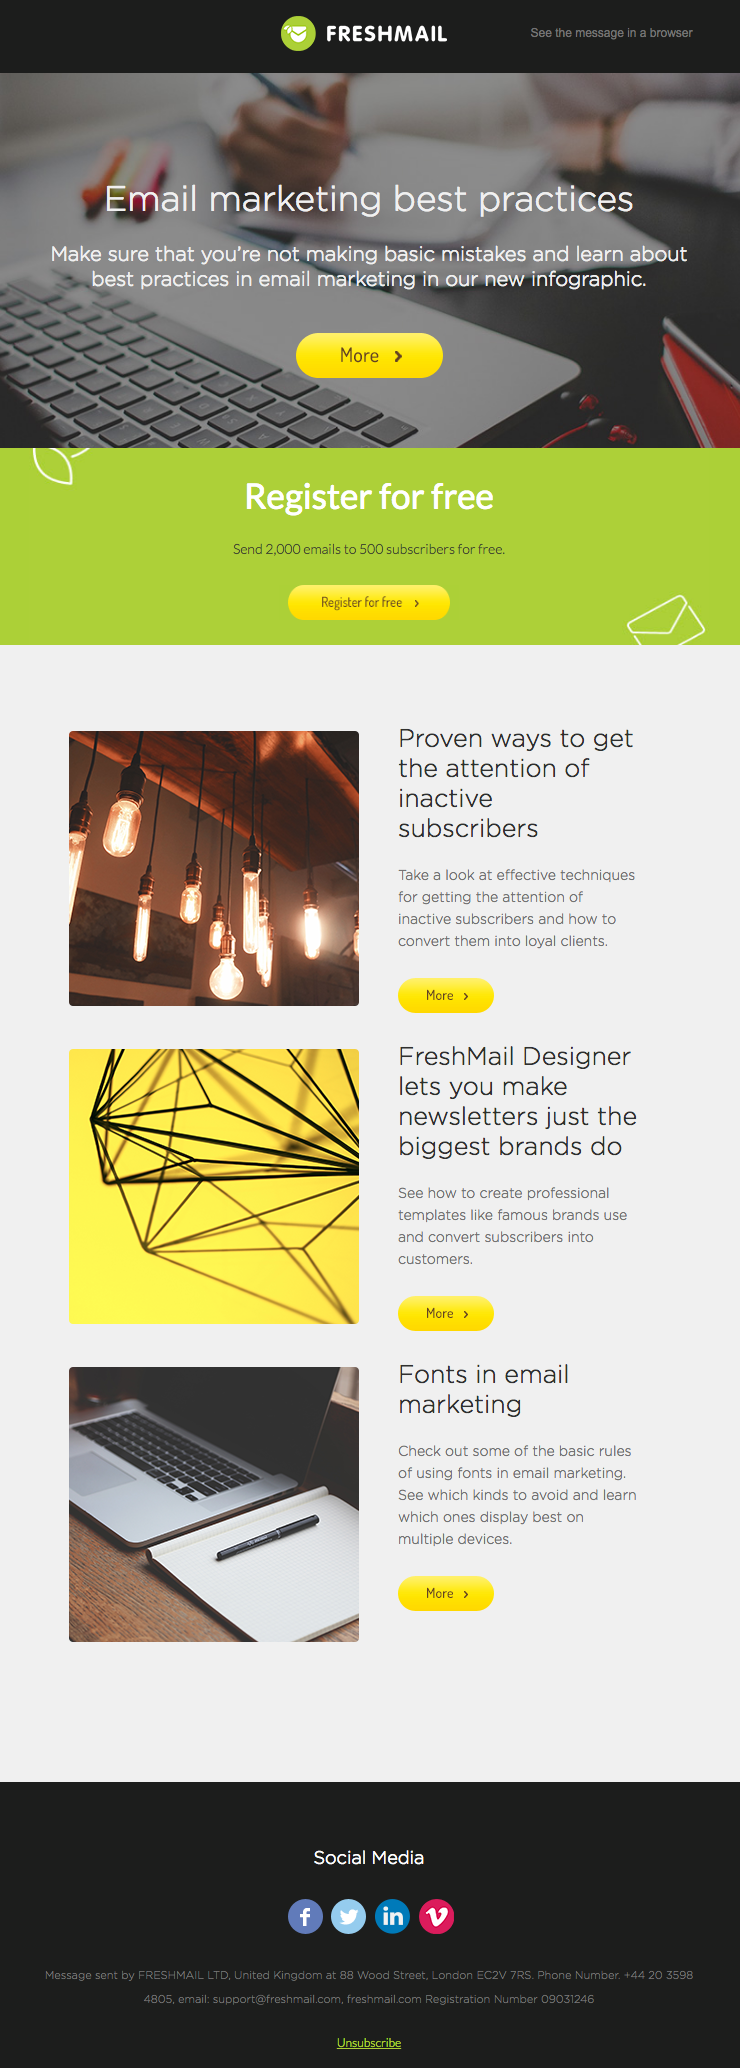 How to Design Visually Appealing Emails